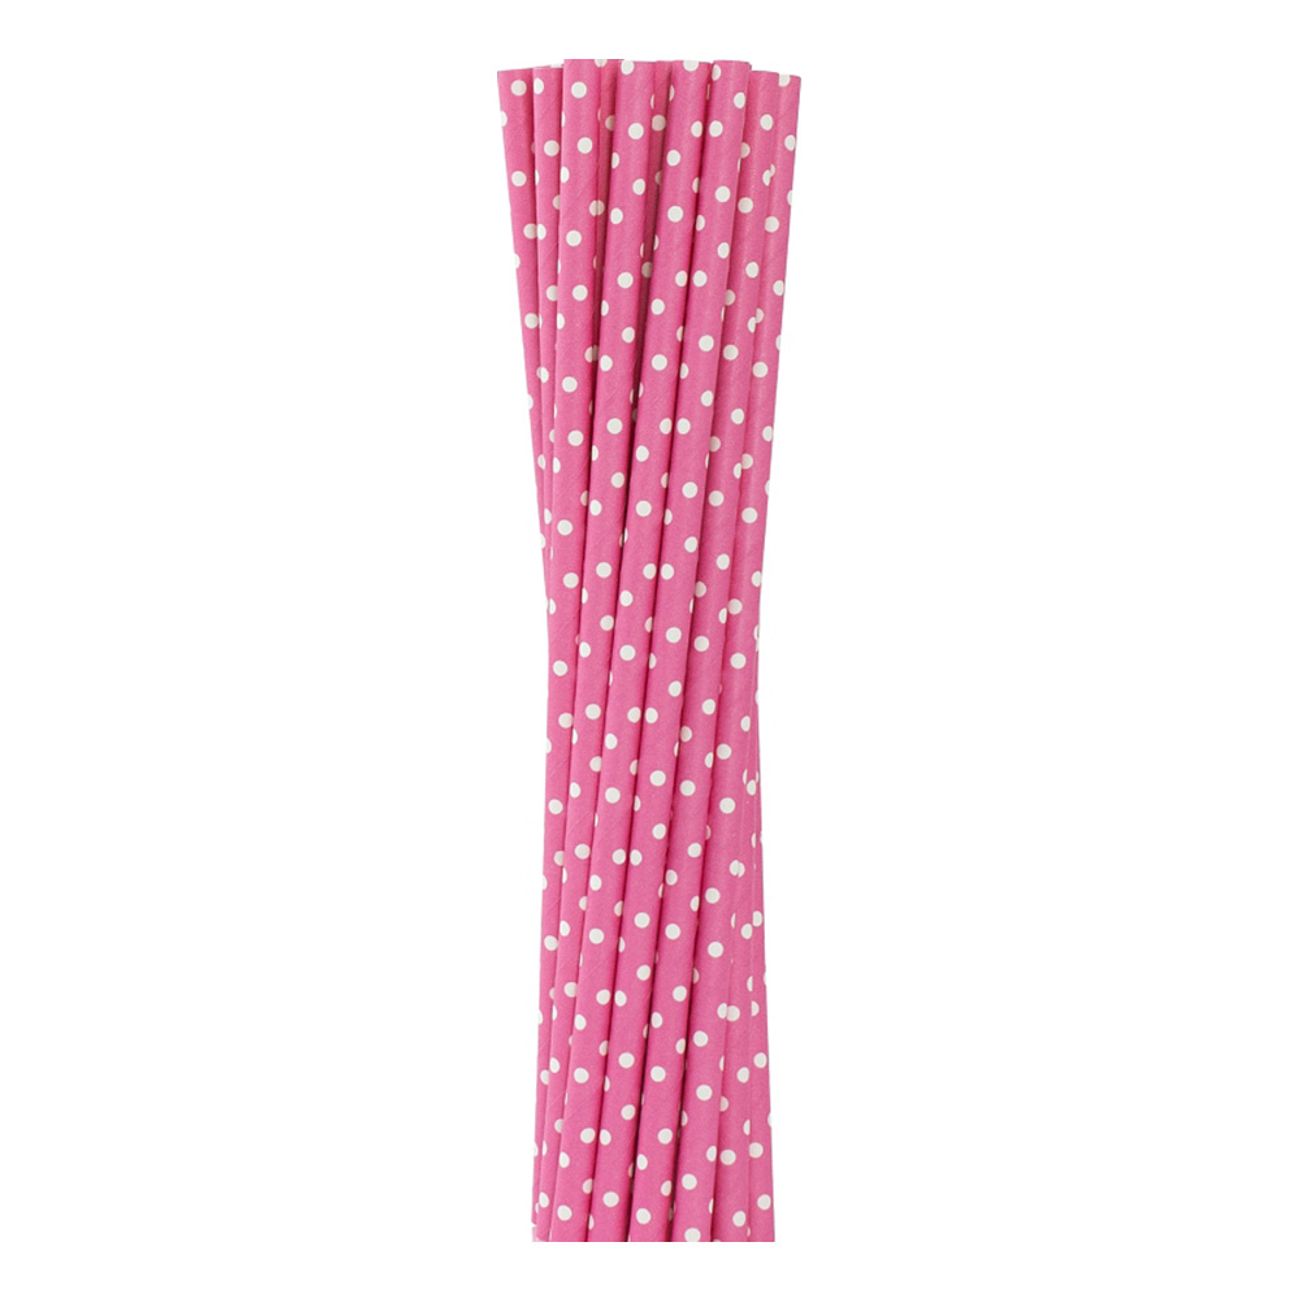 papperssugror-pink-in-white-dots-6x197-mm--12-pcs-1